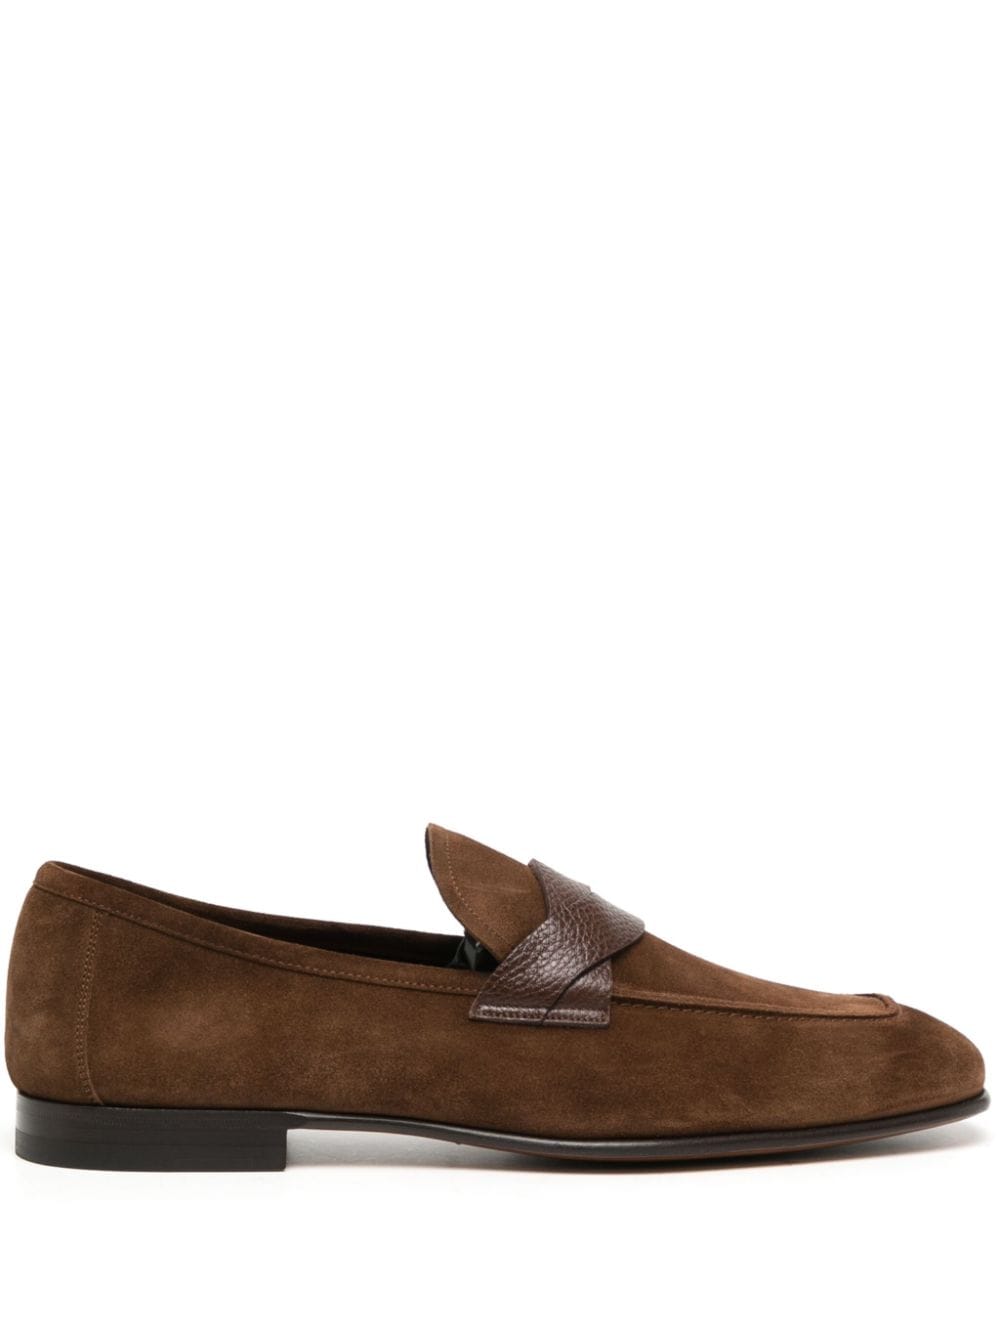 TOM FORD Sean suede loafers - Brown von TOM FORD